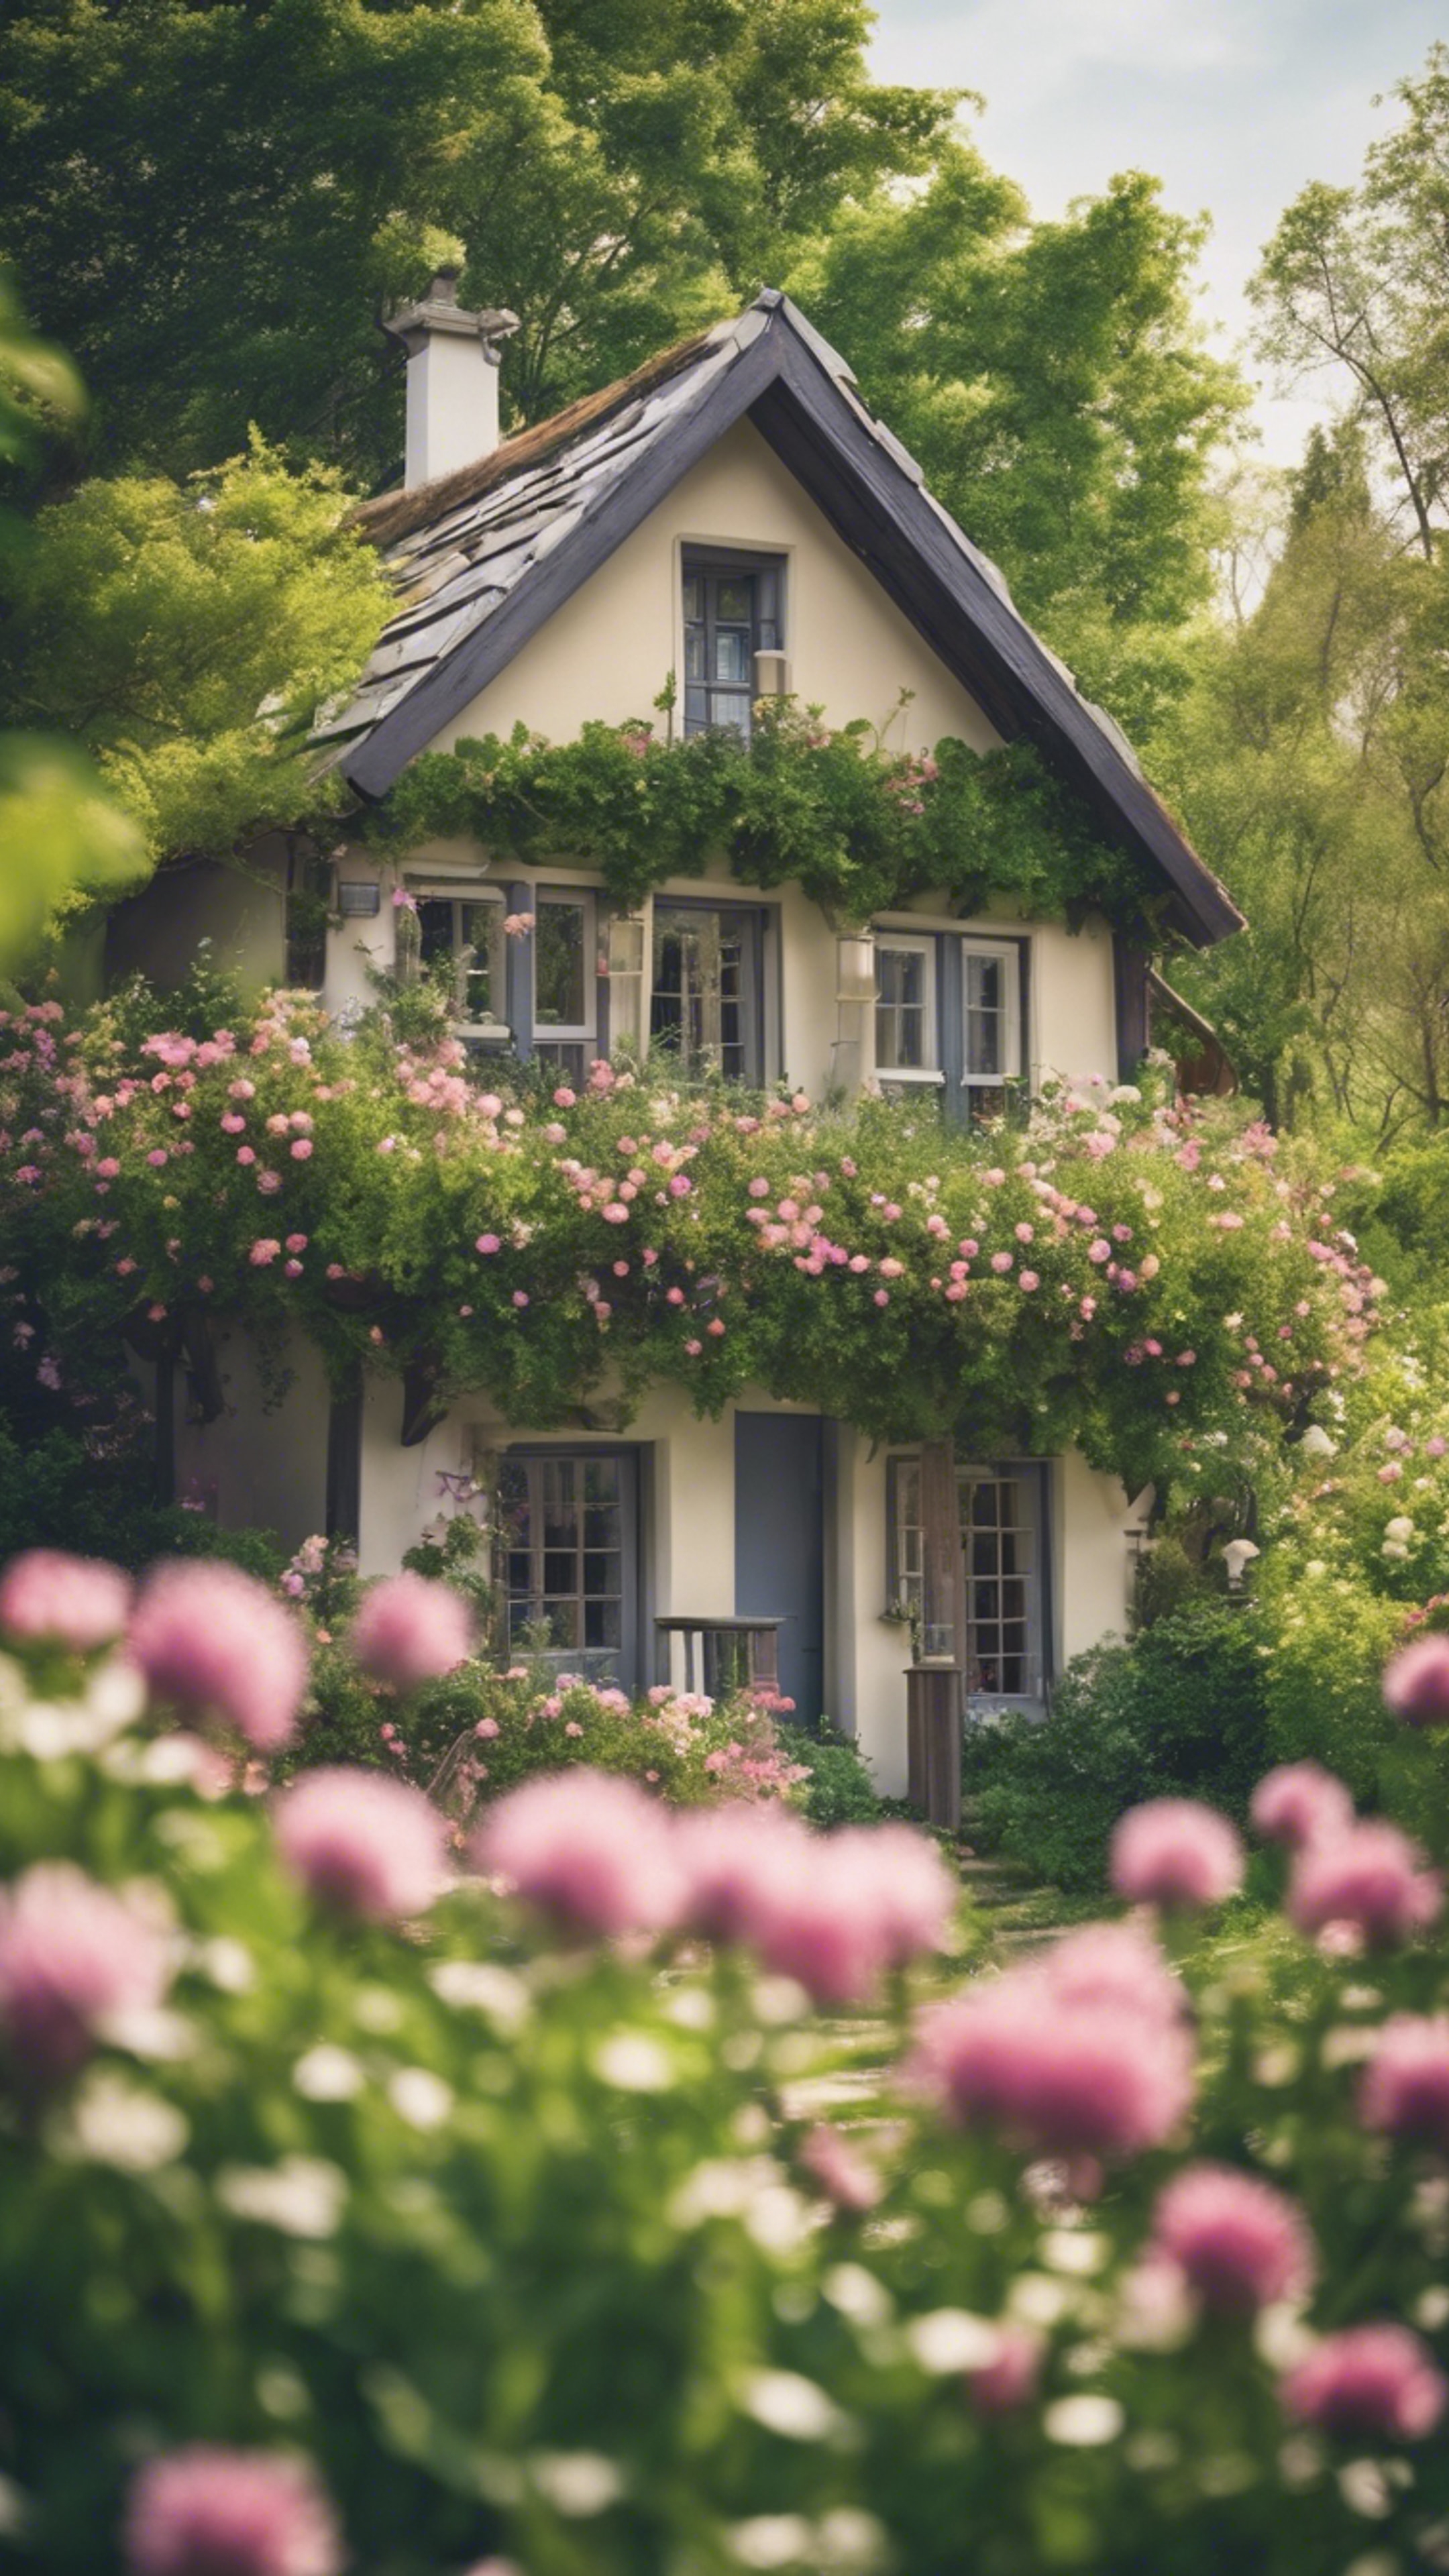 A picturesque scene of a quaint little cottage surrounded by a burst of spring flowers and new green foliage. 벽지[ad9cdb560dce44d082cc]